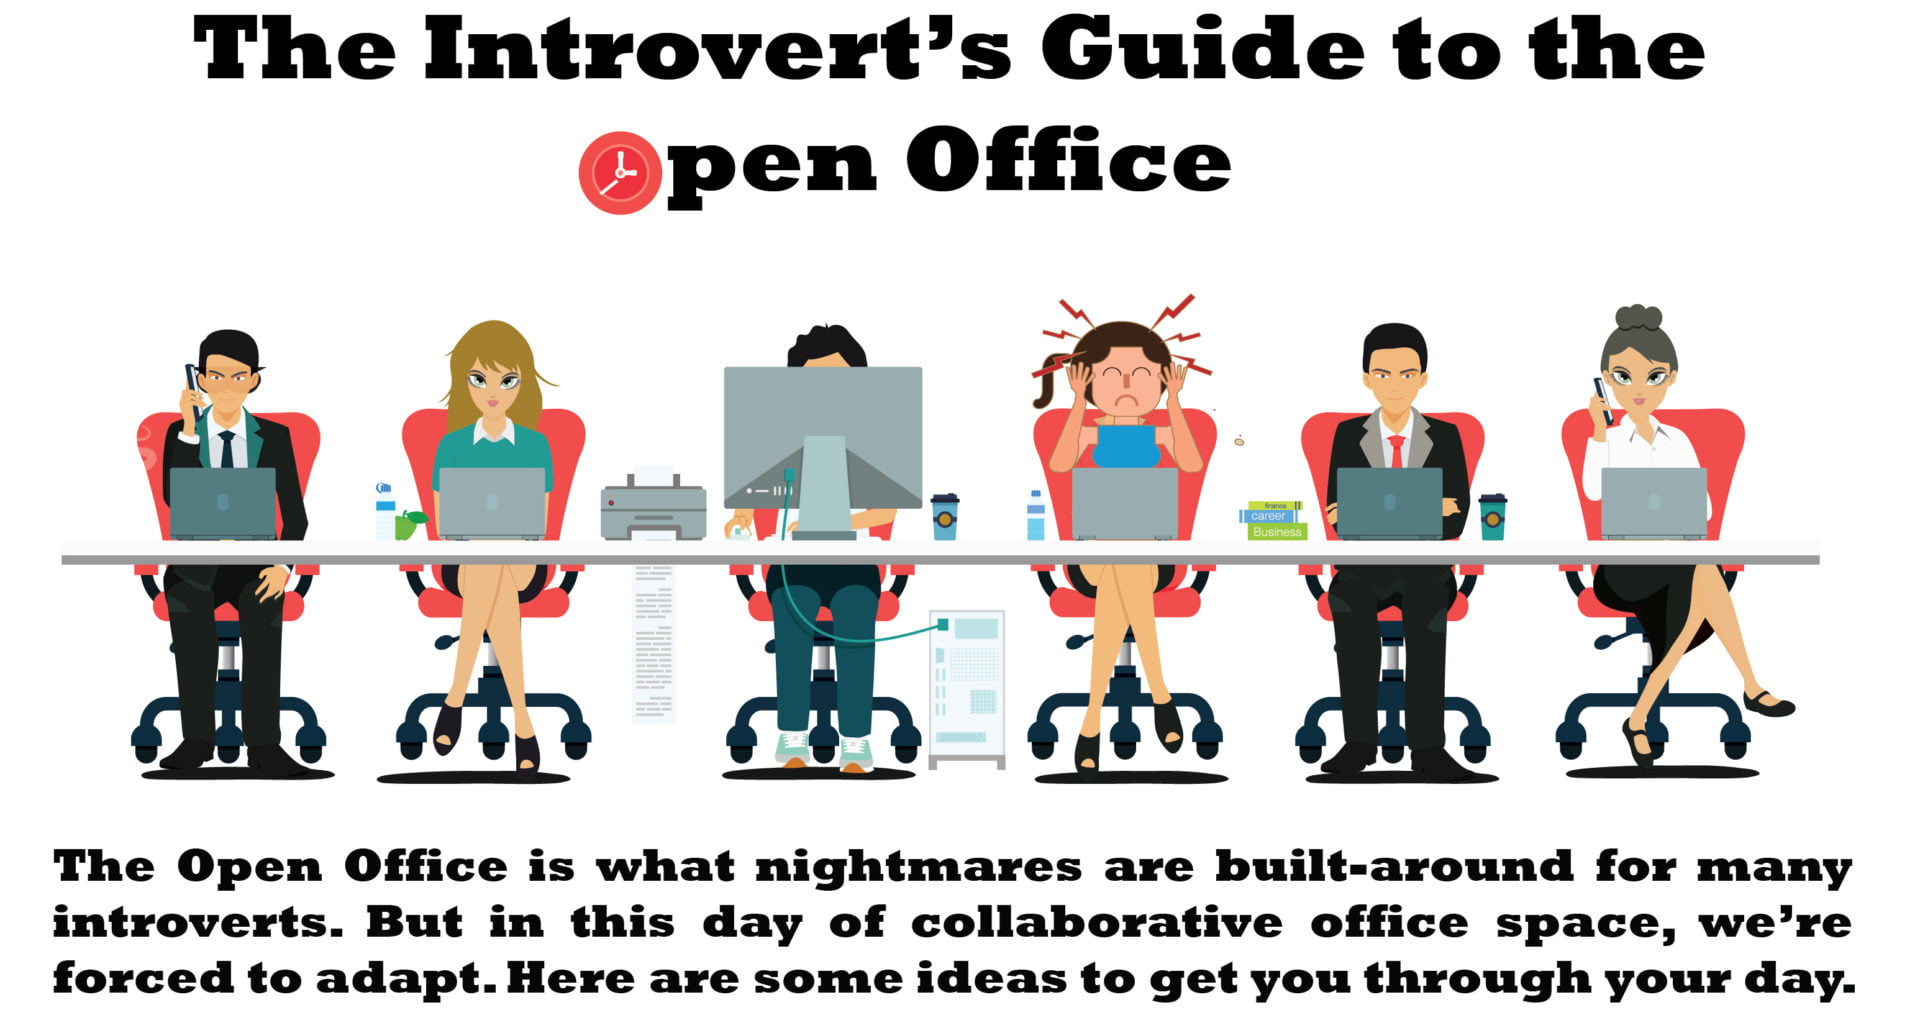 an introverts guide to the open office